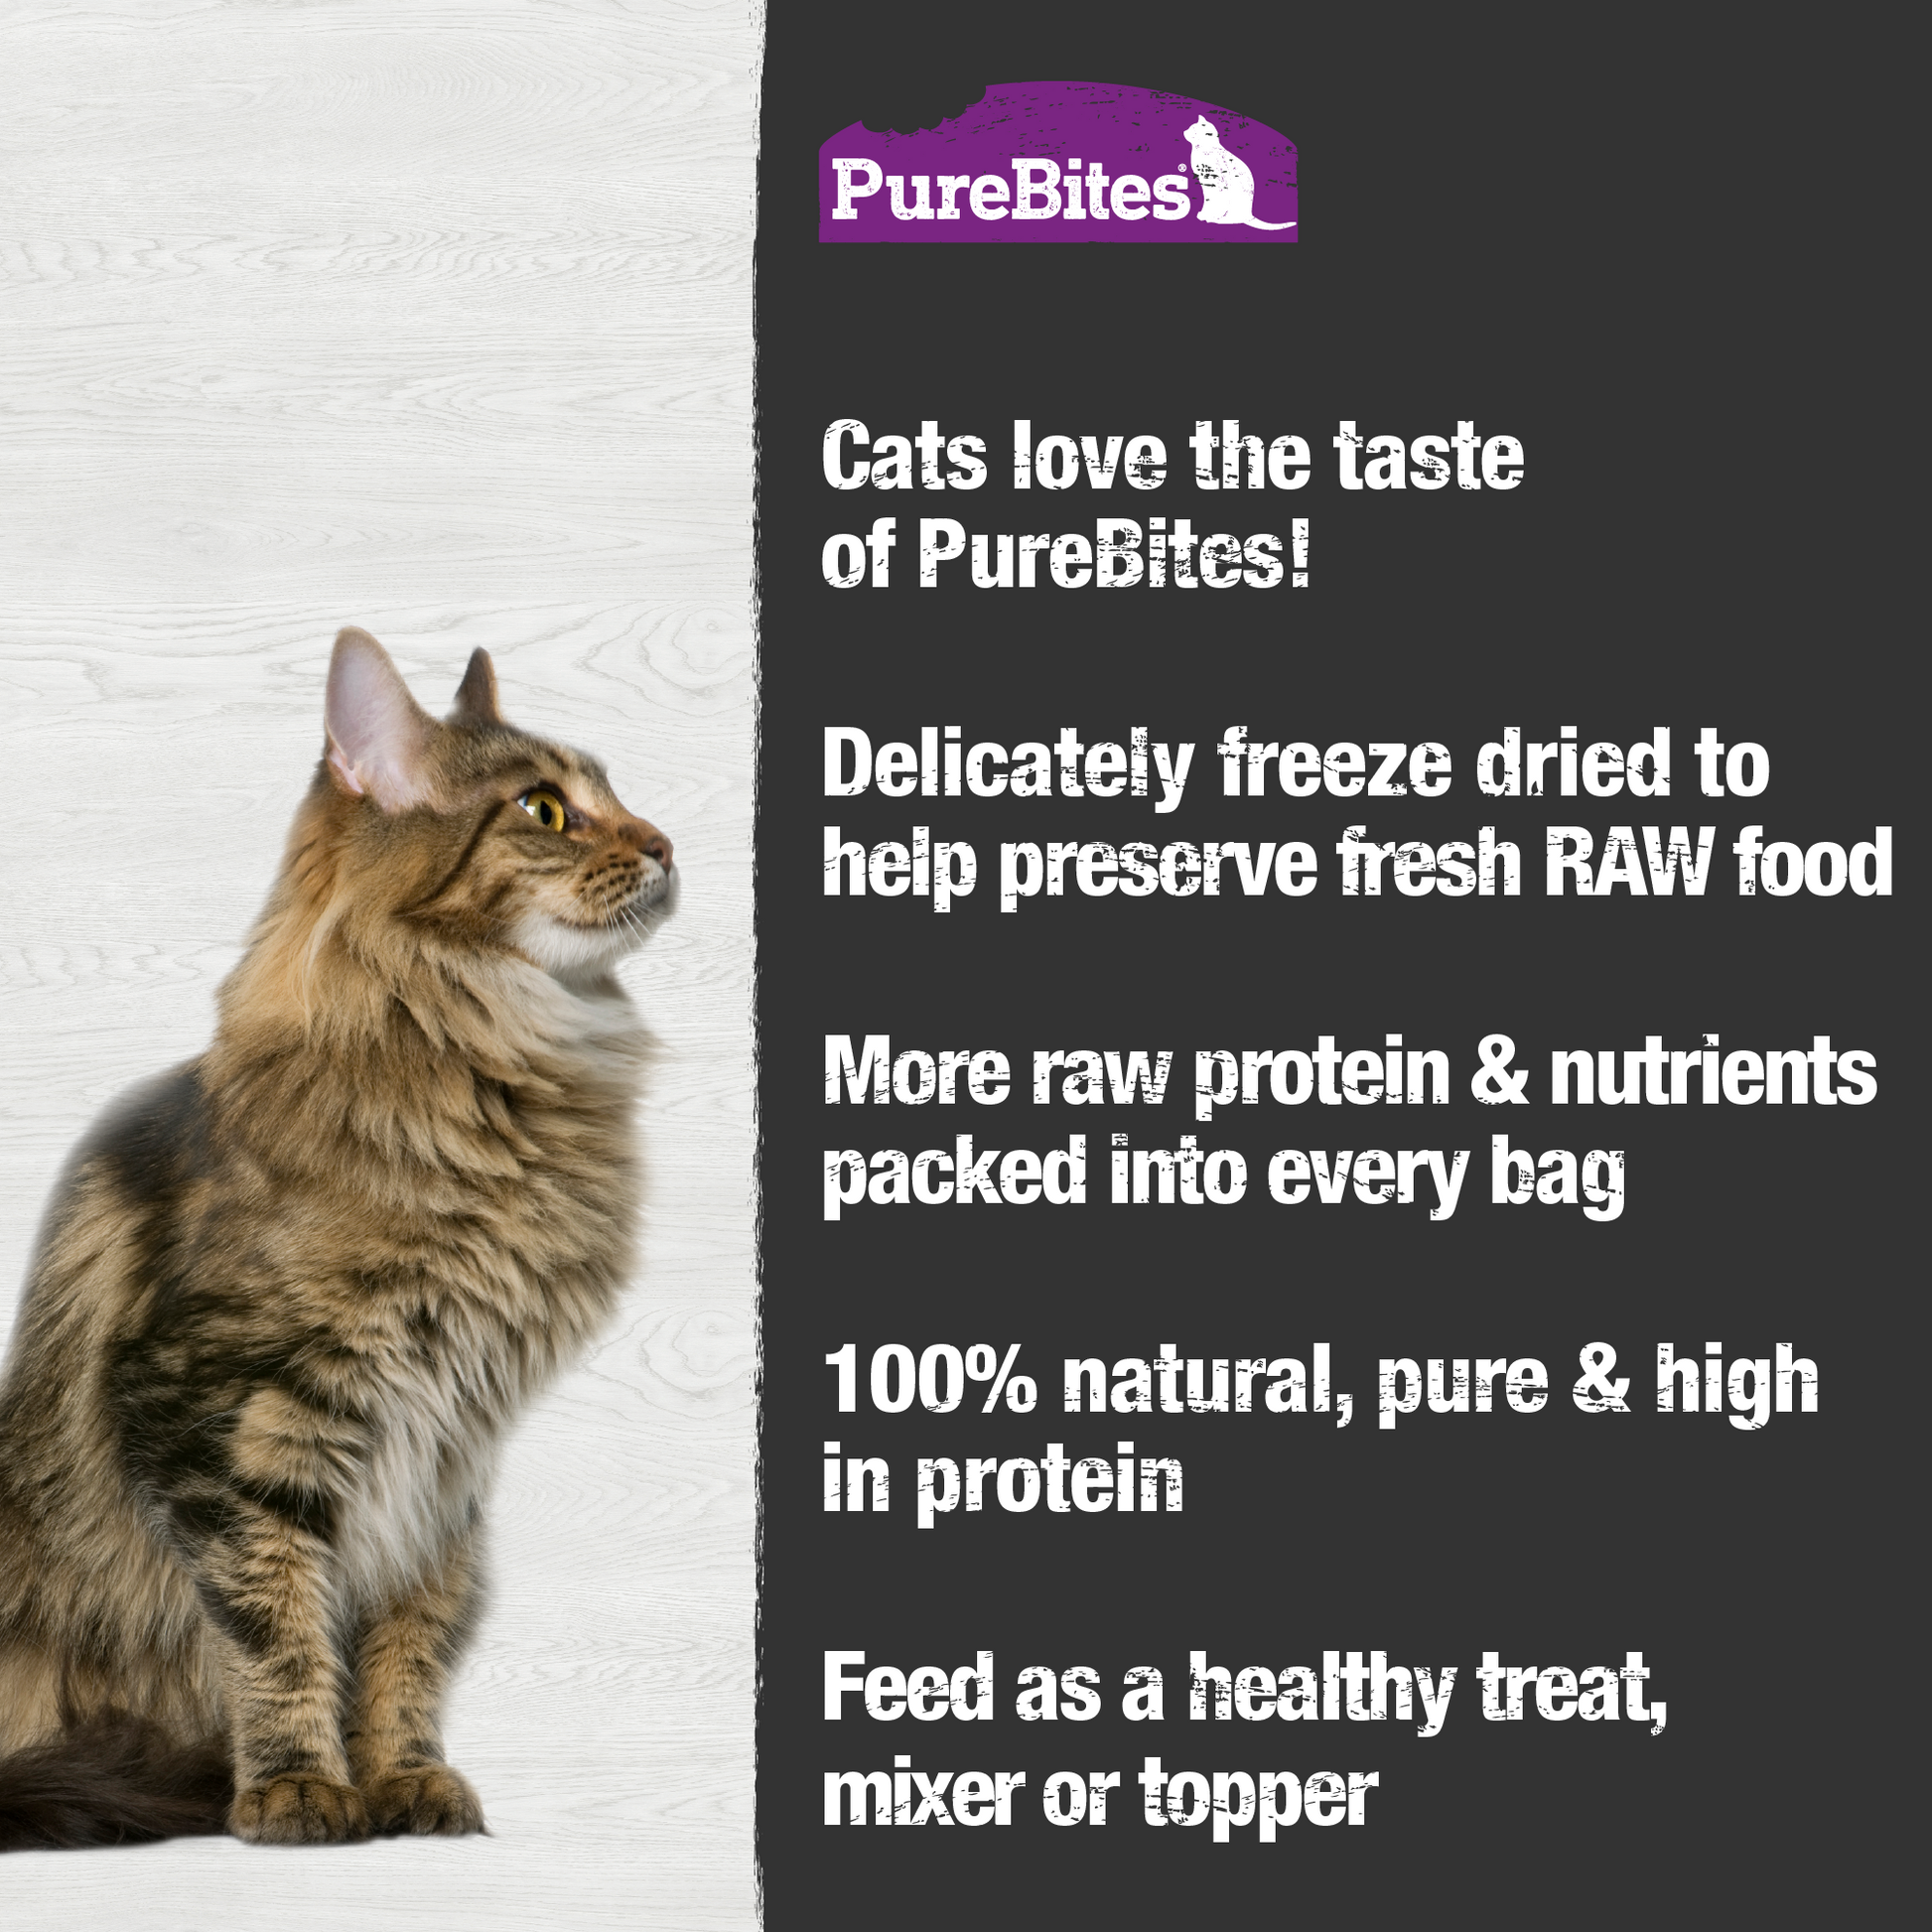 Made fresh & pure means more RAW protein and nutrients packed into every bag. Our ocean whitefish  is freeze dried to help preserve its RAW taste, and nutrition, and mirror a cat’s ancestral diet